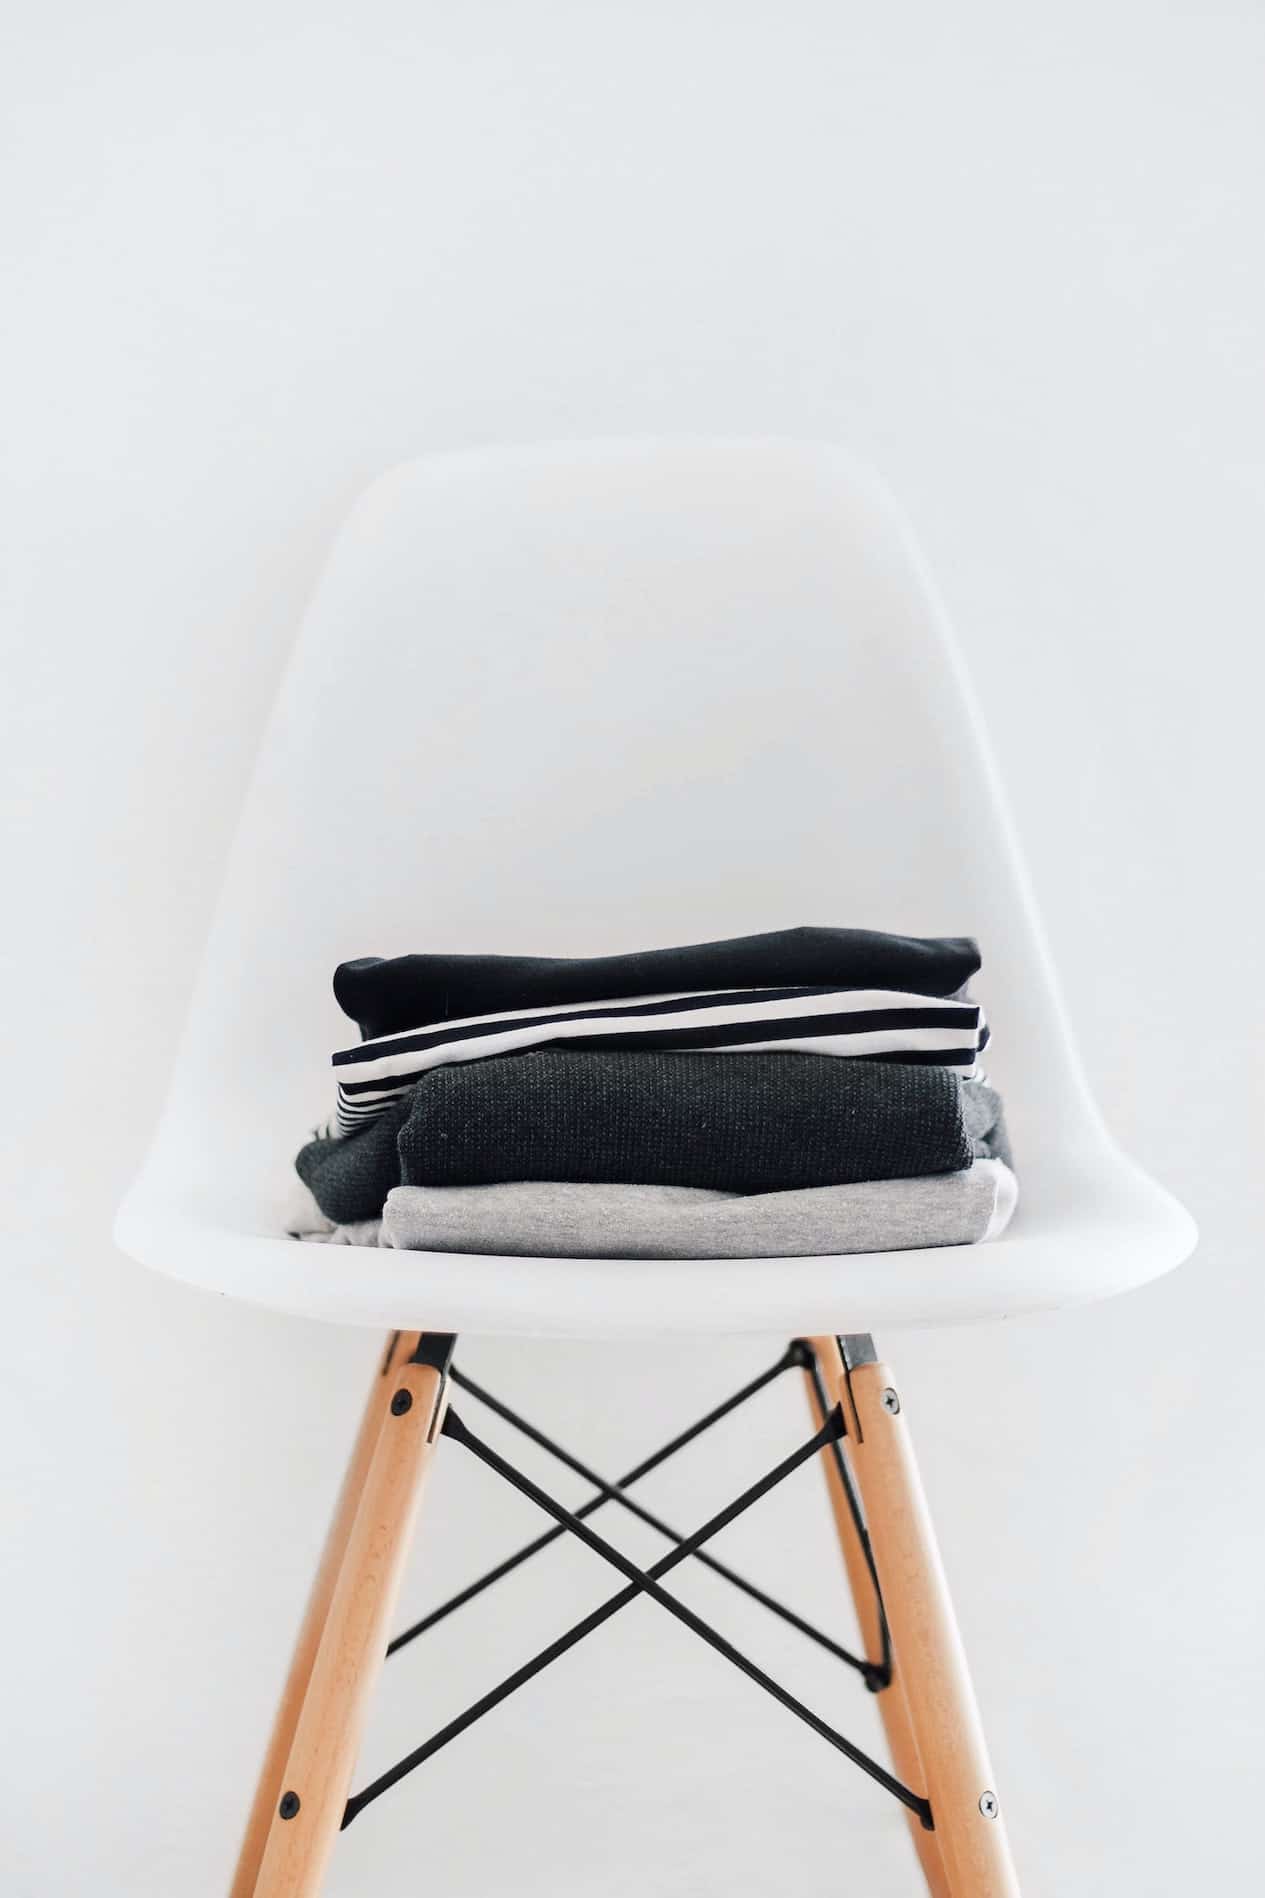 Black, white and gray clothing stacked on a white chair.